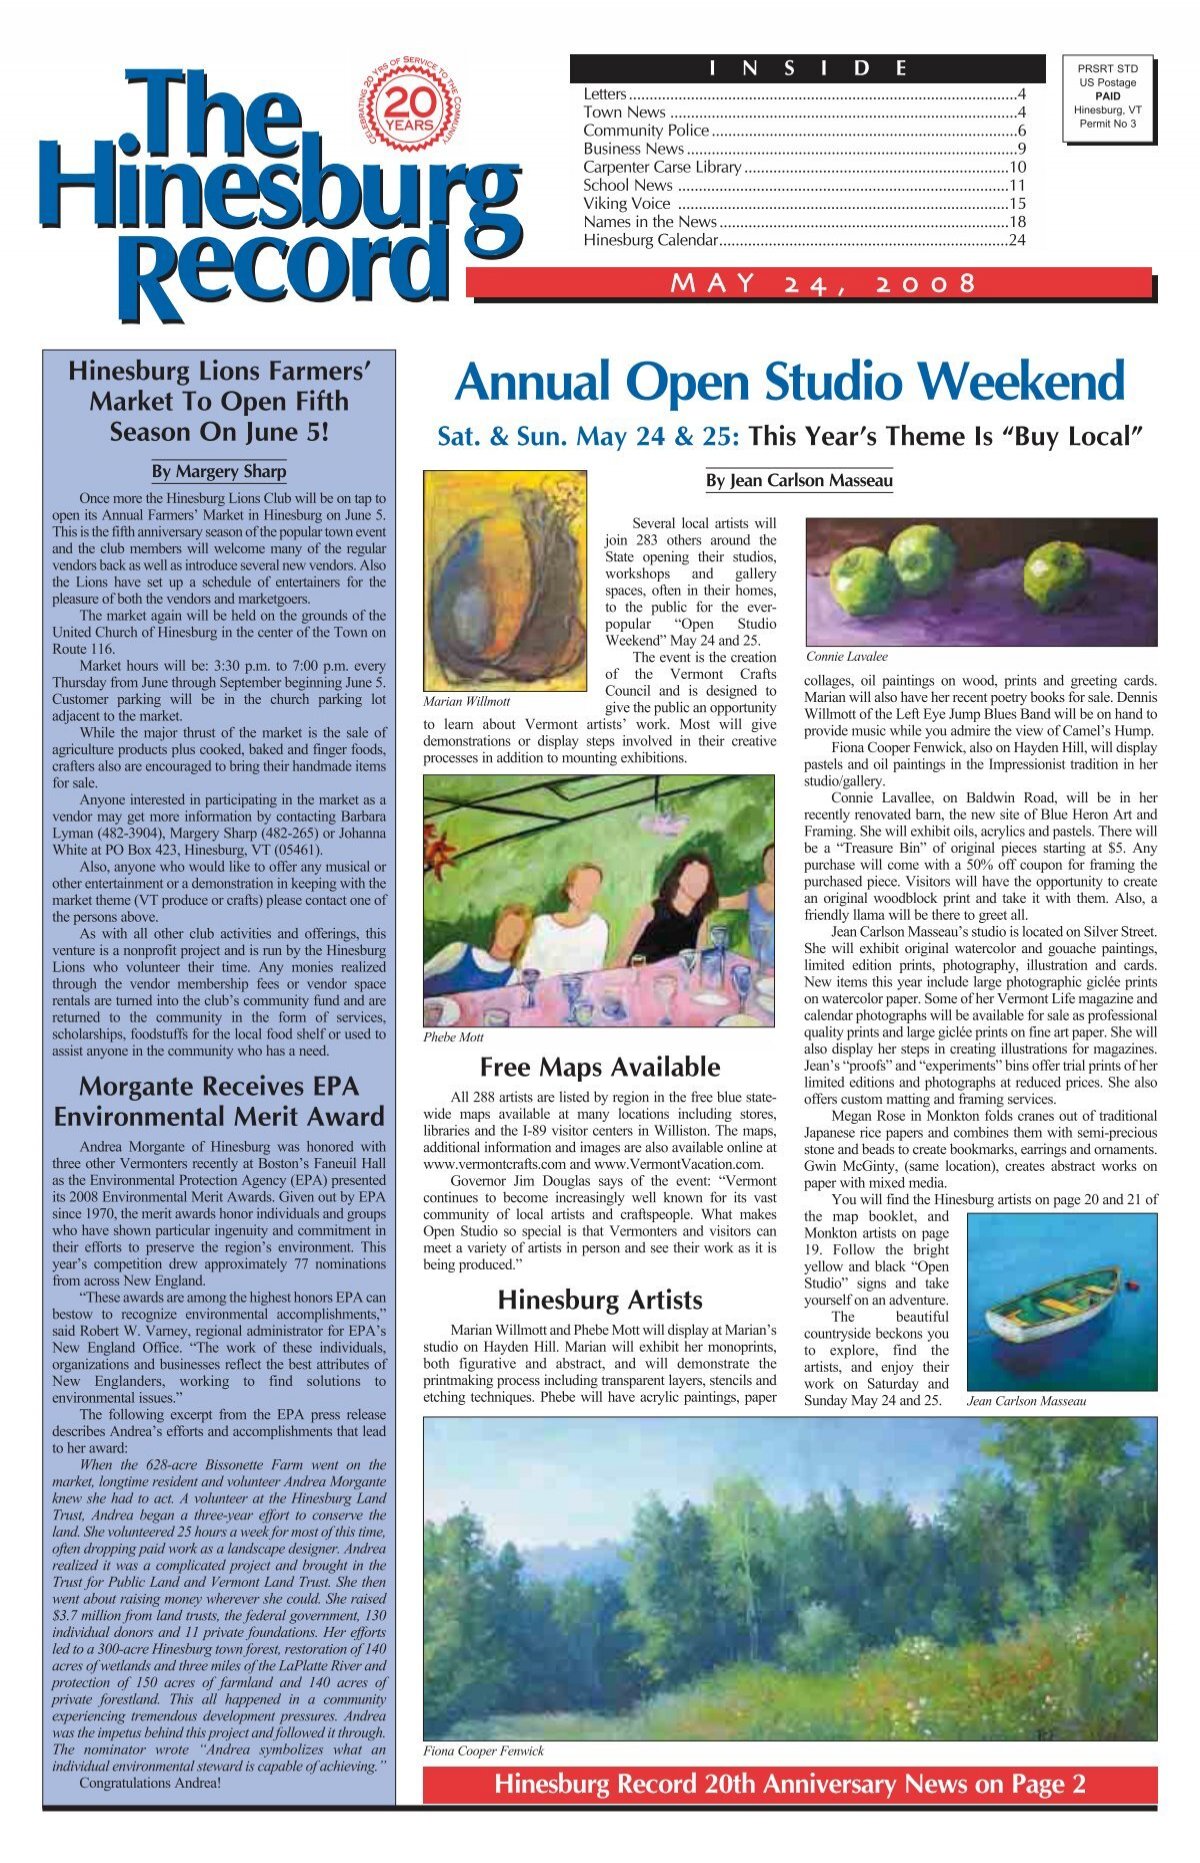 Annual Open Studio Weekend - Hinesburg Record